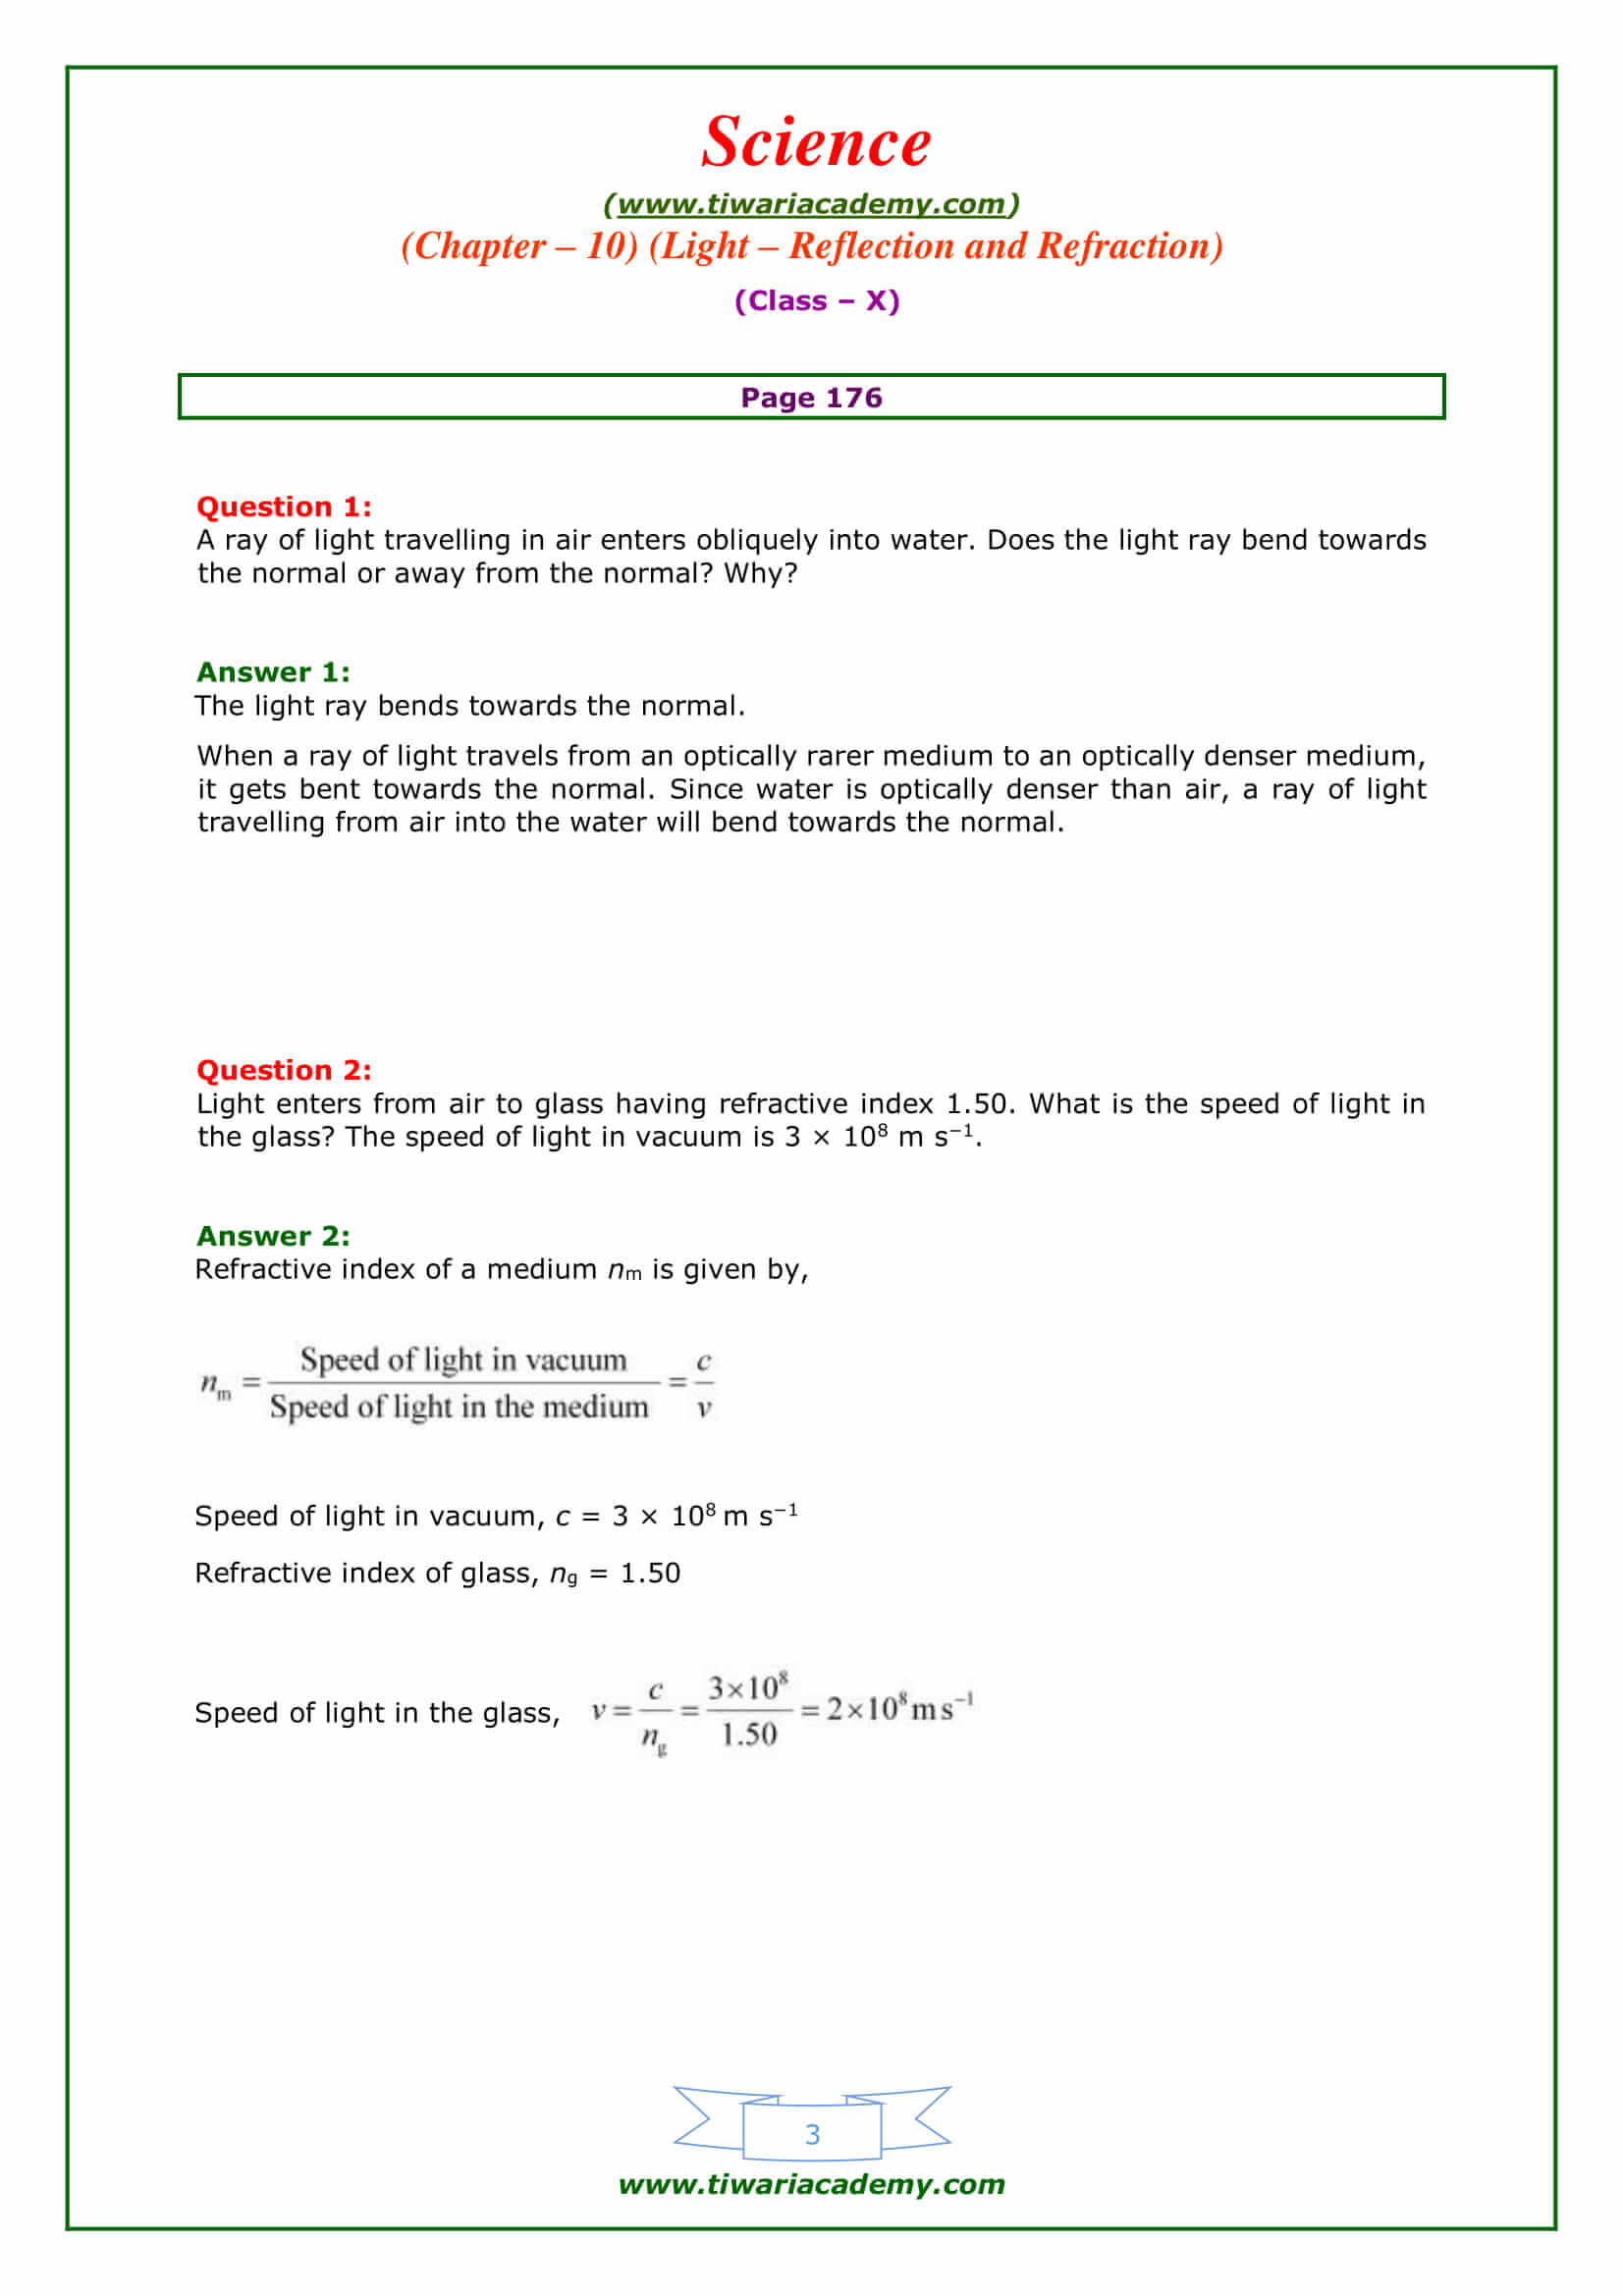 NCERT Solutions for Class 10 Science Chapter 10 page 176 answers